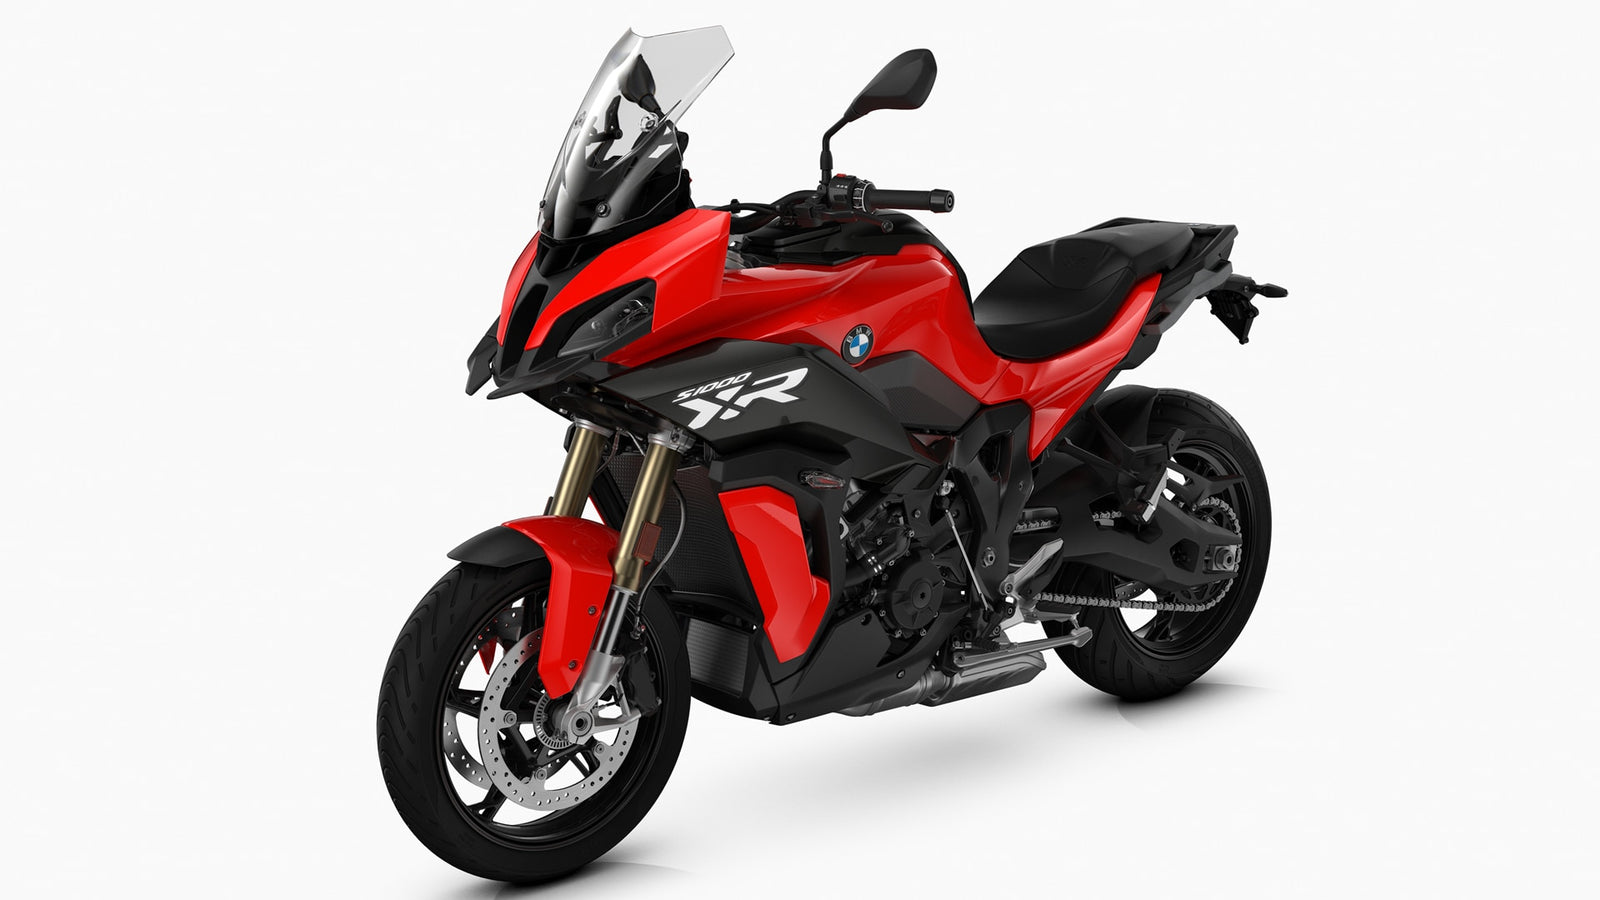 BMW Introduces the All-New S 1000 XR as a Replacement for its 2020 Model